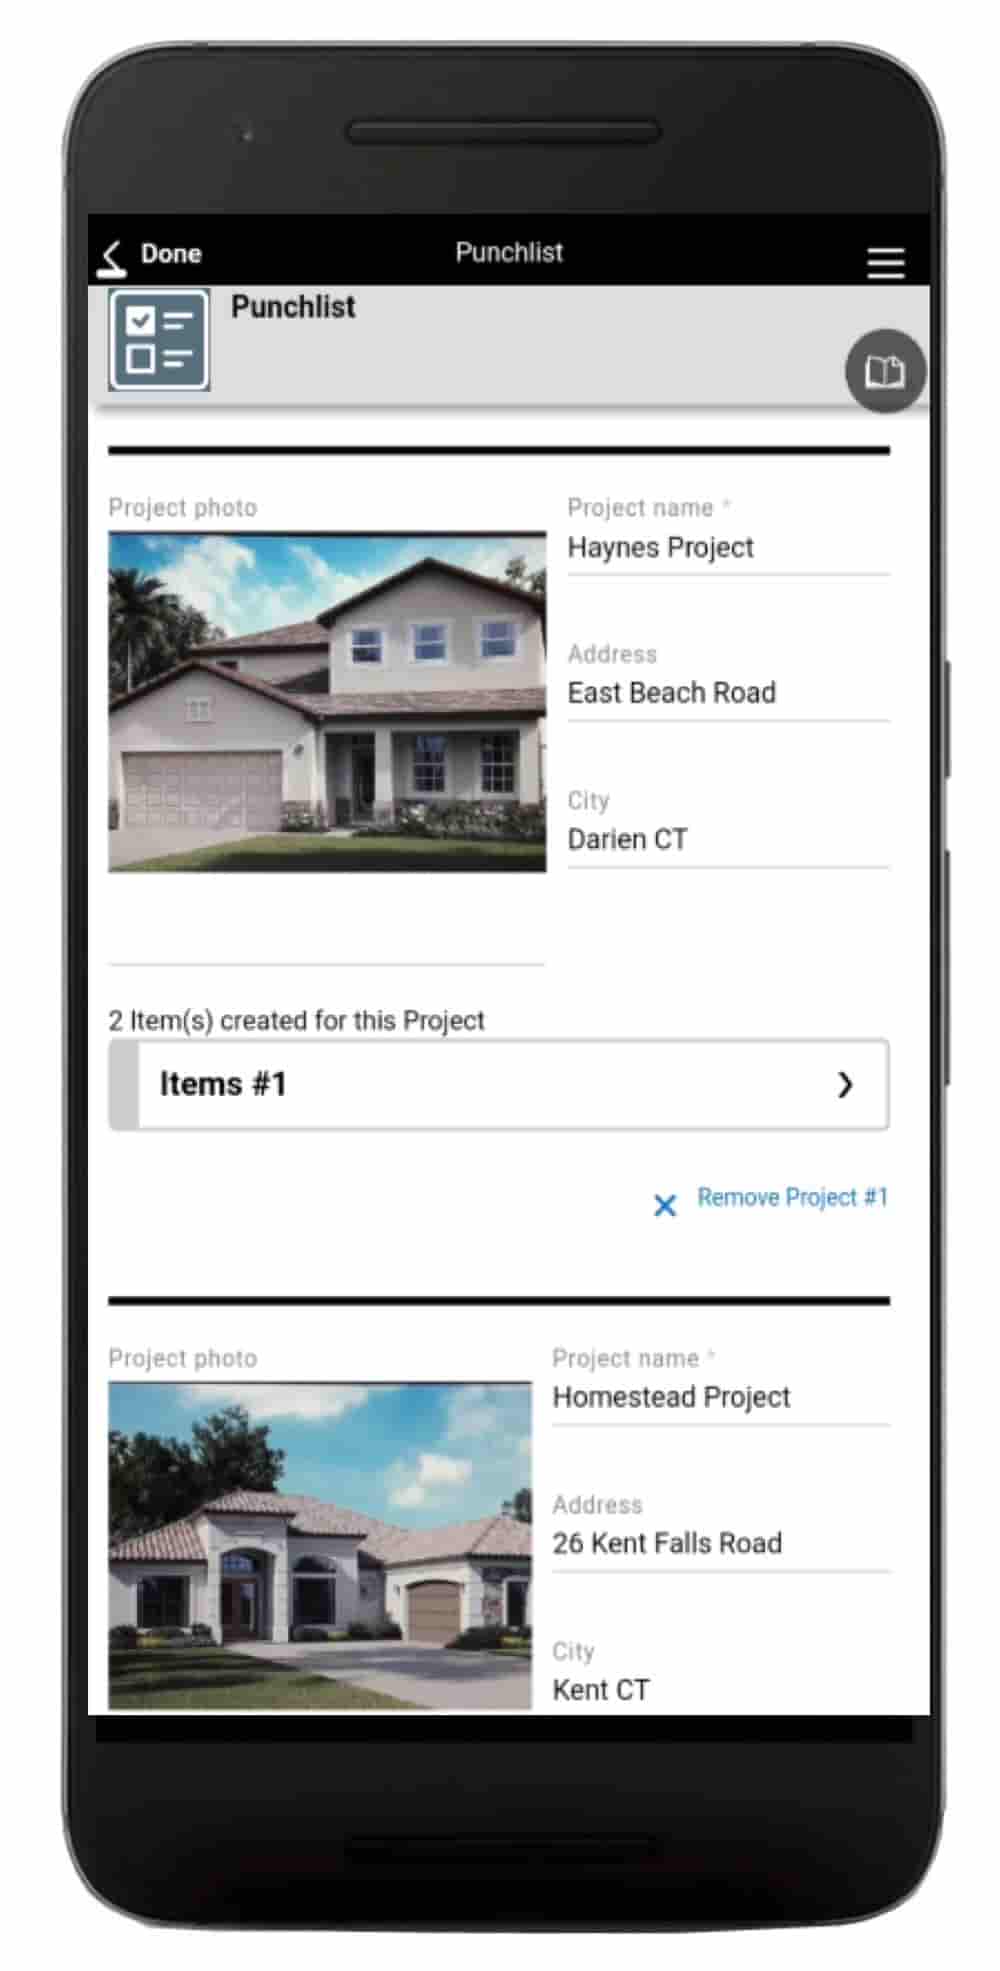 Construction Apps for Punch Lists